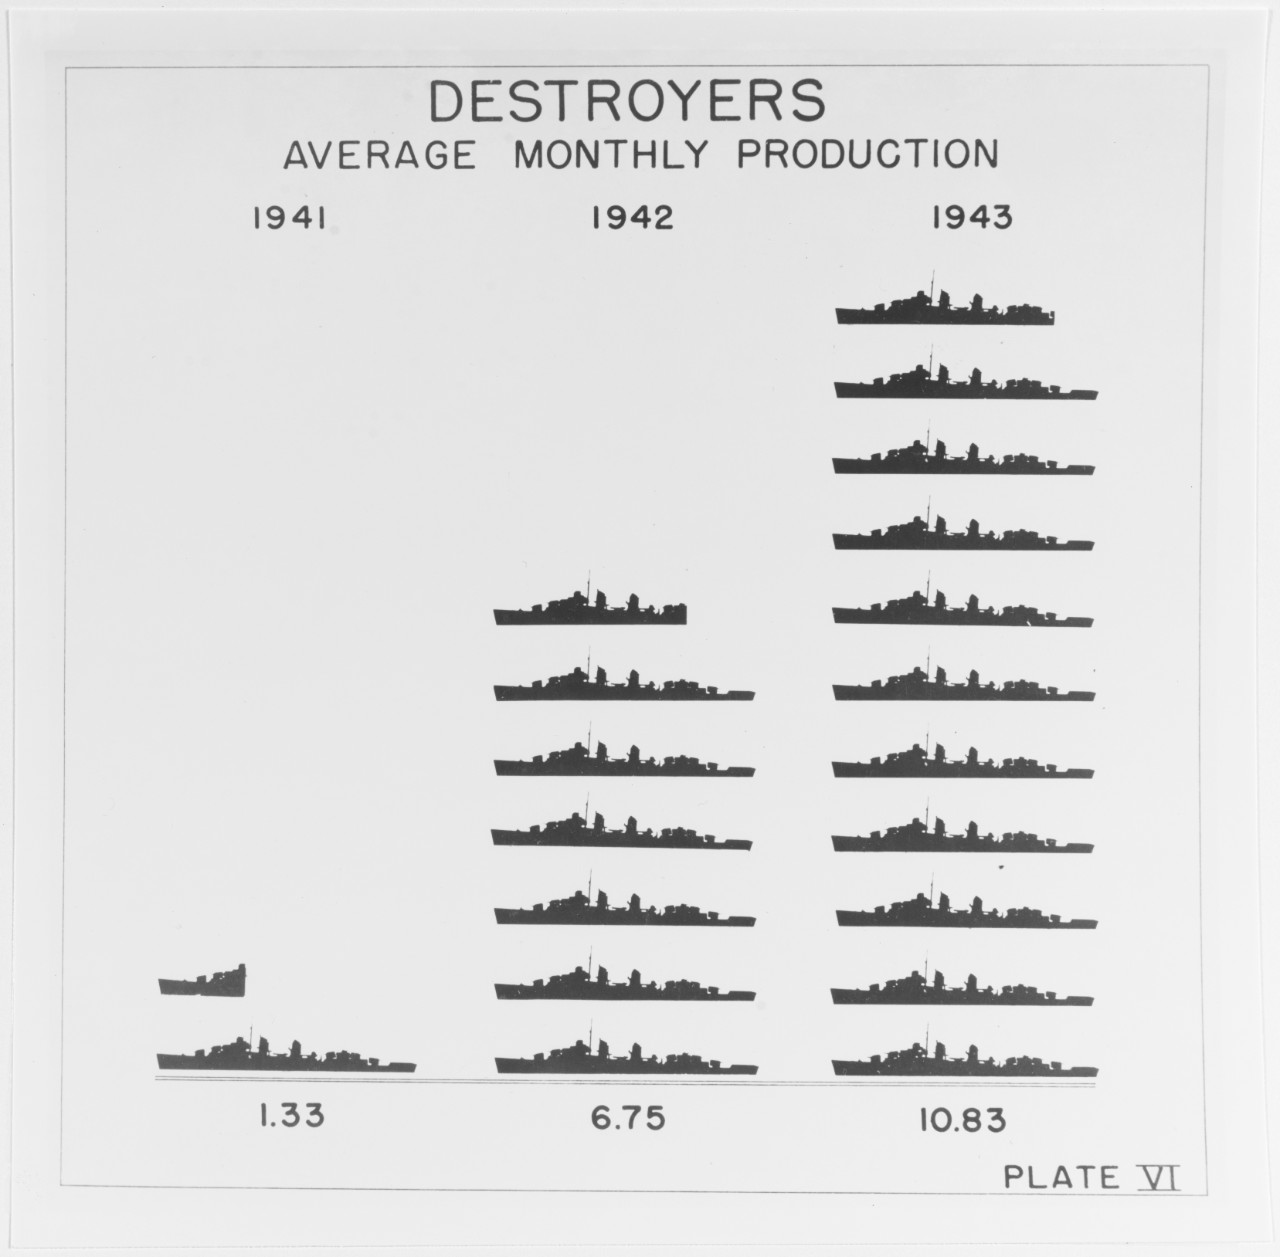 "Destroyers, average monthly production, 1941, 1942, 1943"